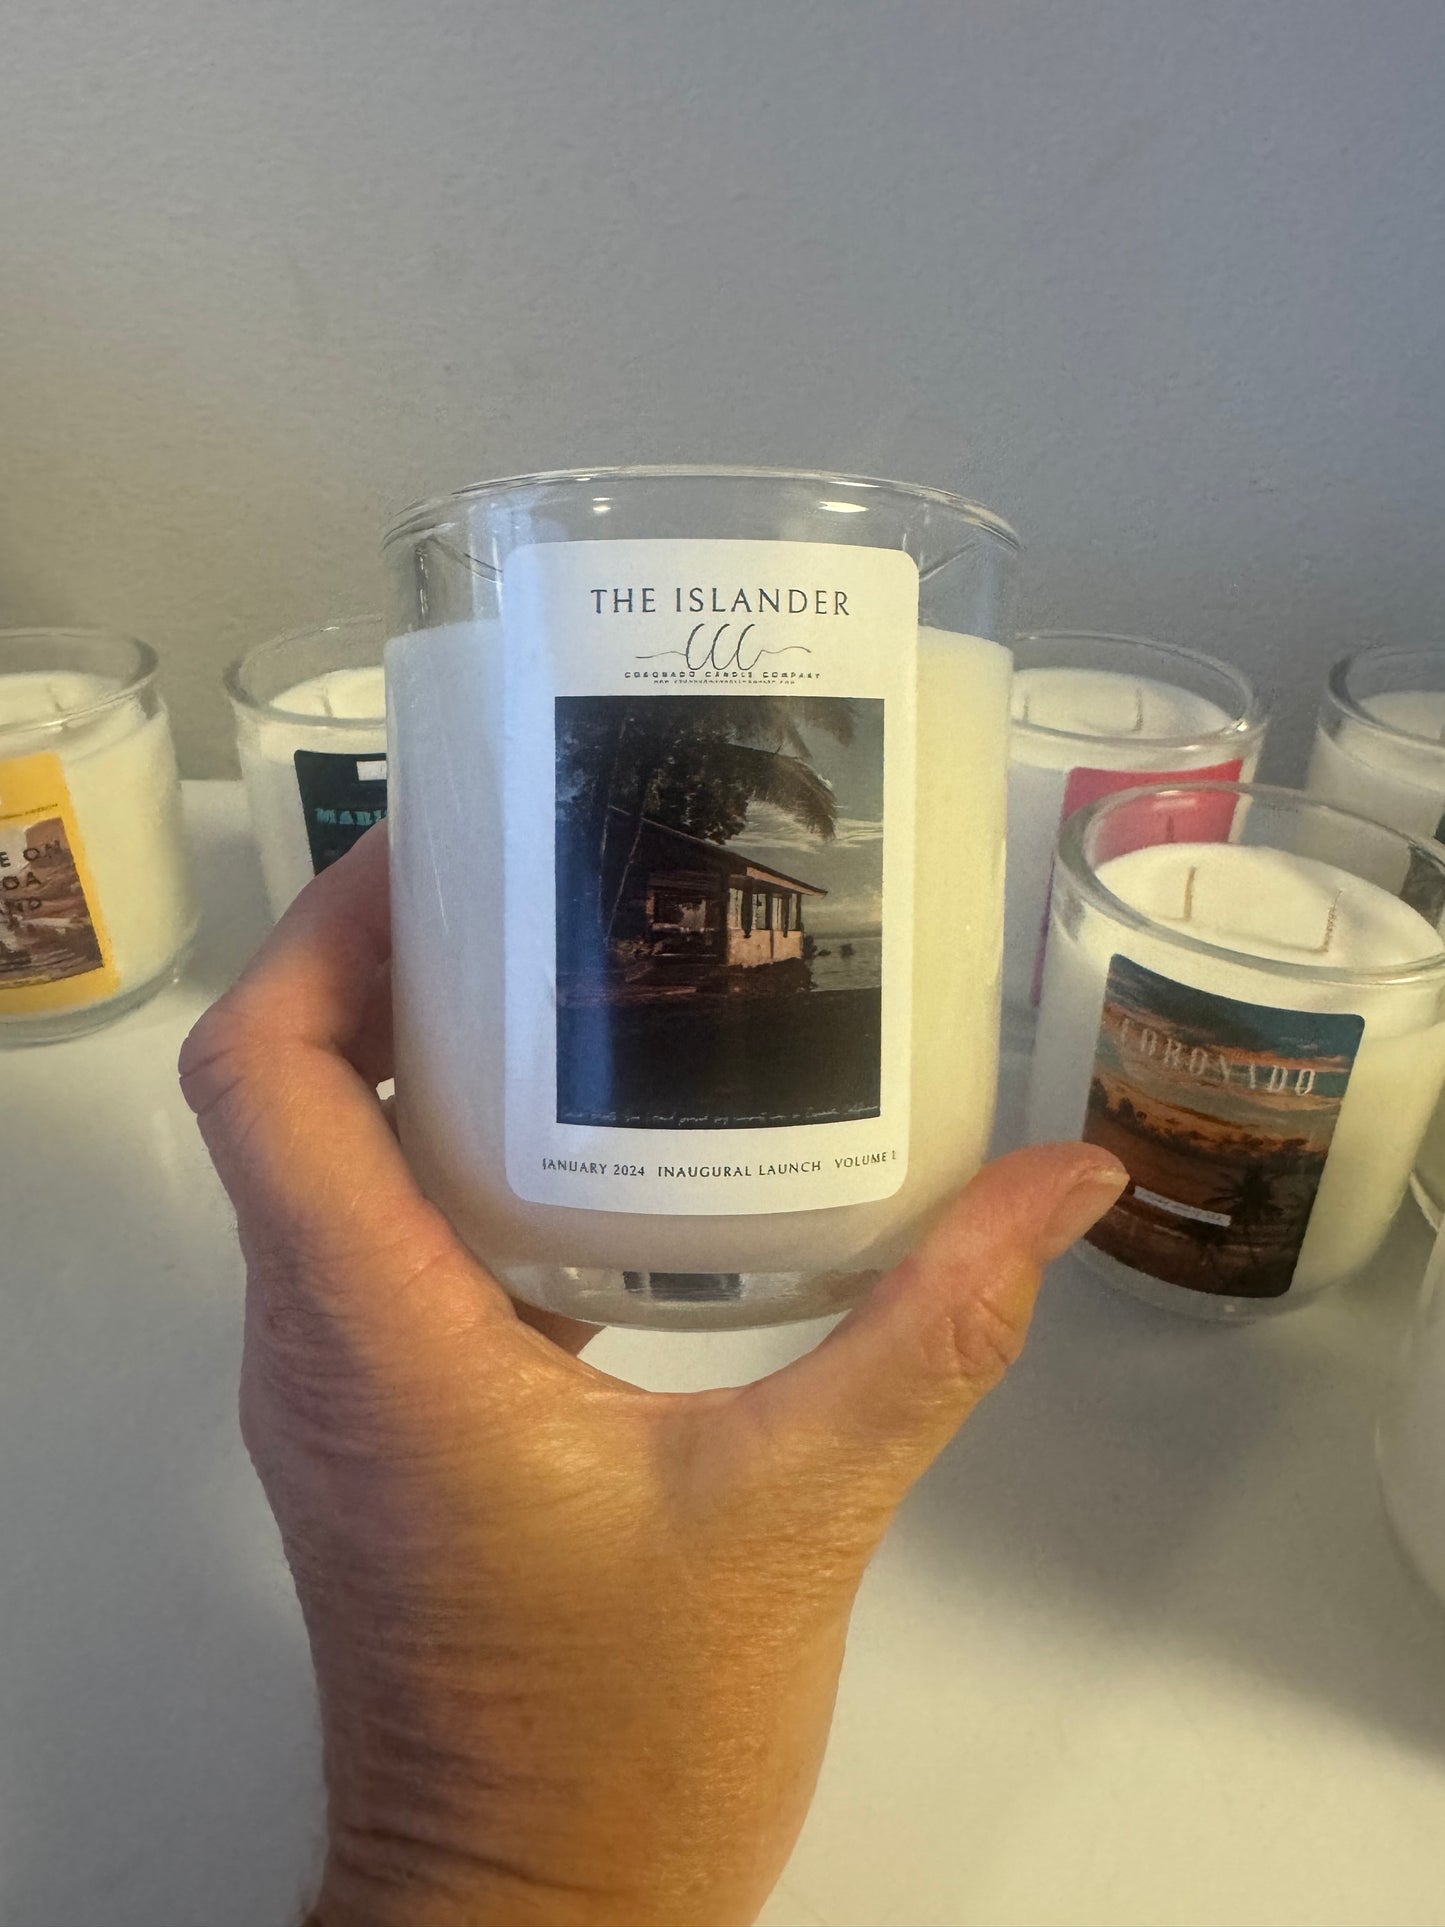 The Islander Candle